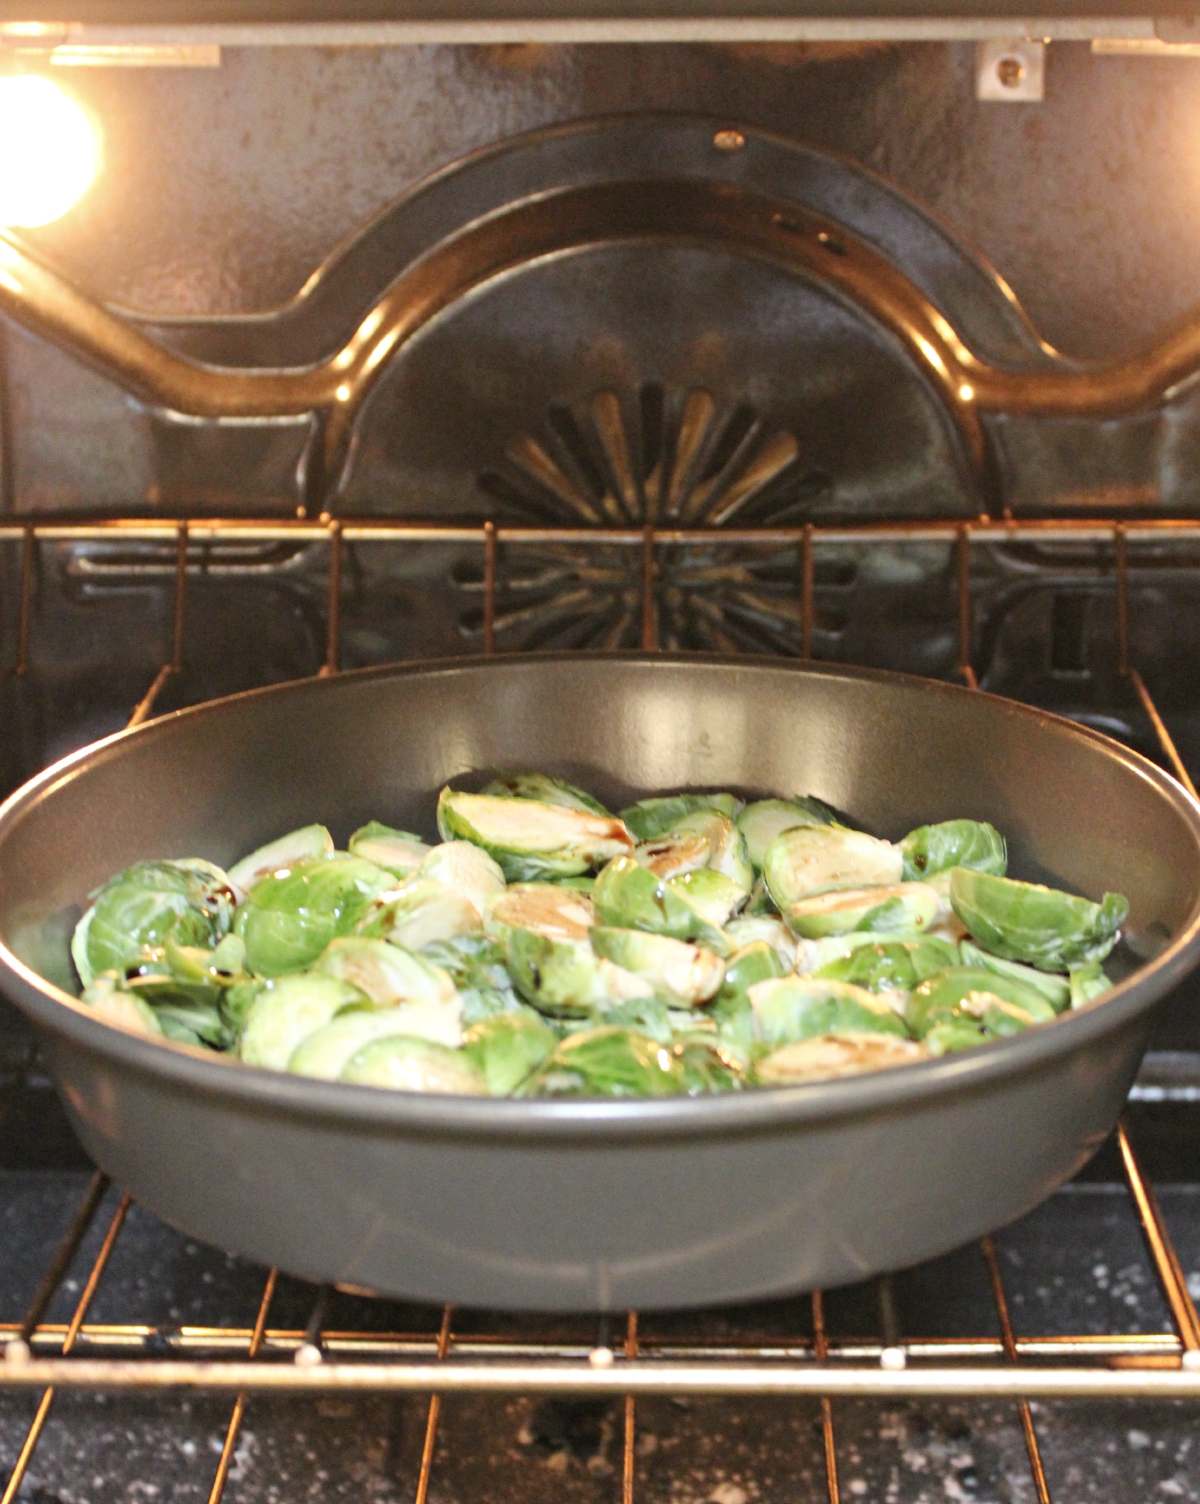 Delicious roasted brussels sprouts with balsamic vinegar and olive oil